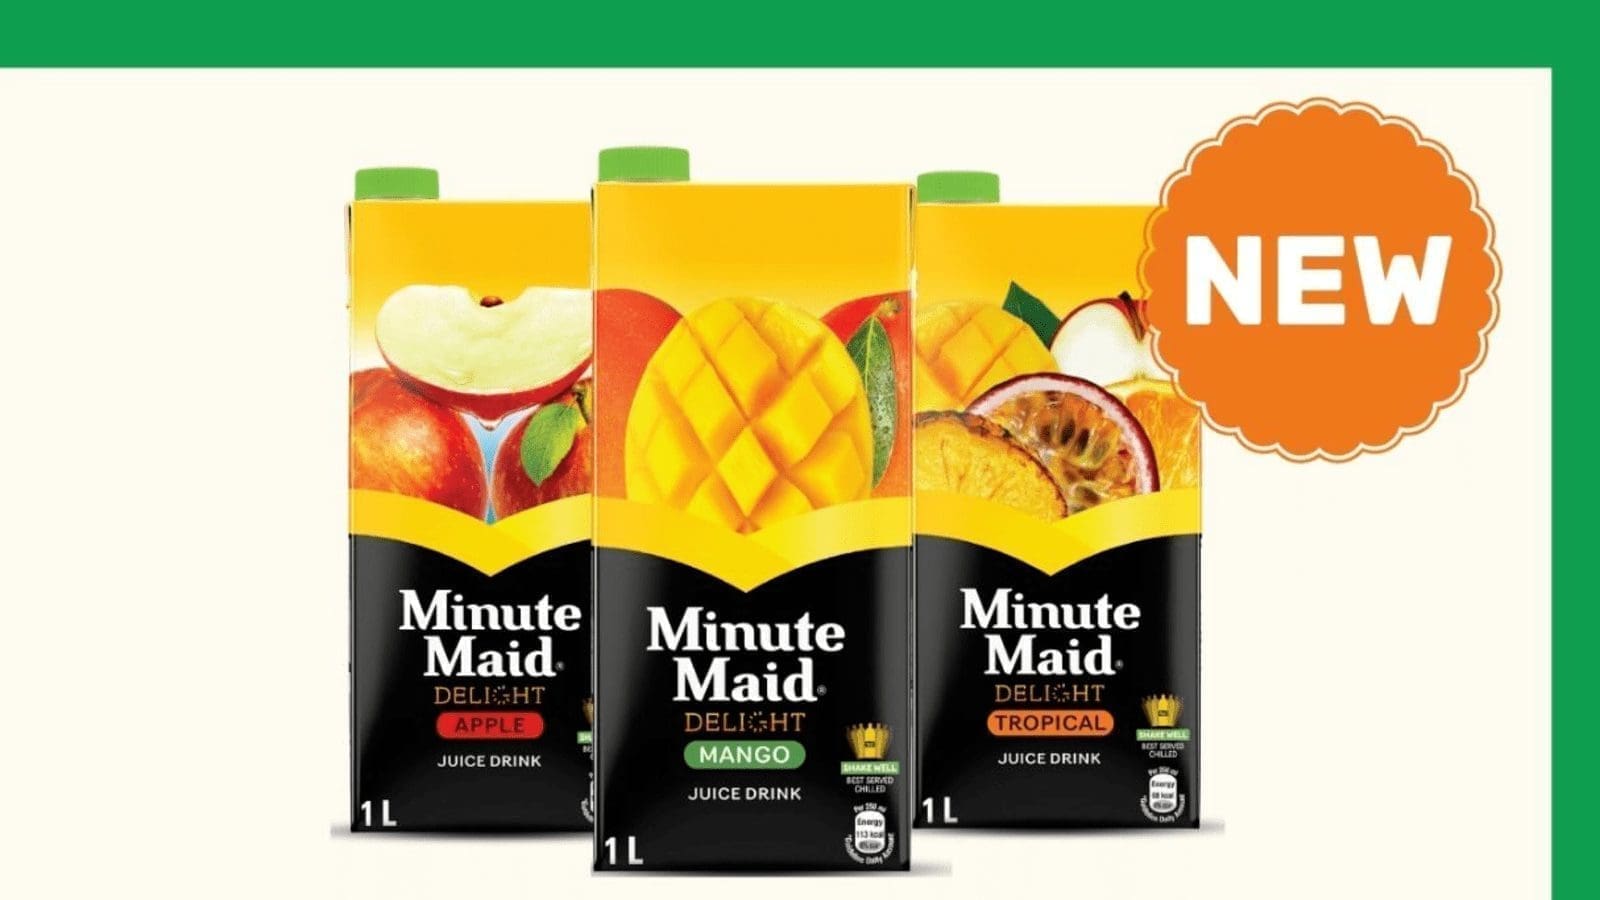 Coca-Cola extends sustainability packaging campaign to juices with launch of new Minute Maid Tetra Pak